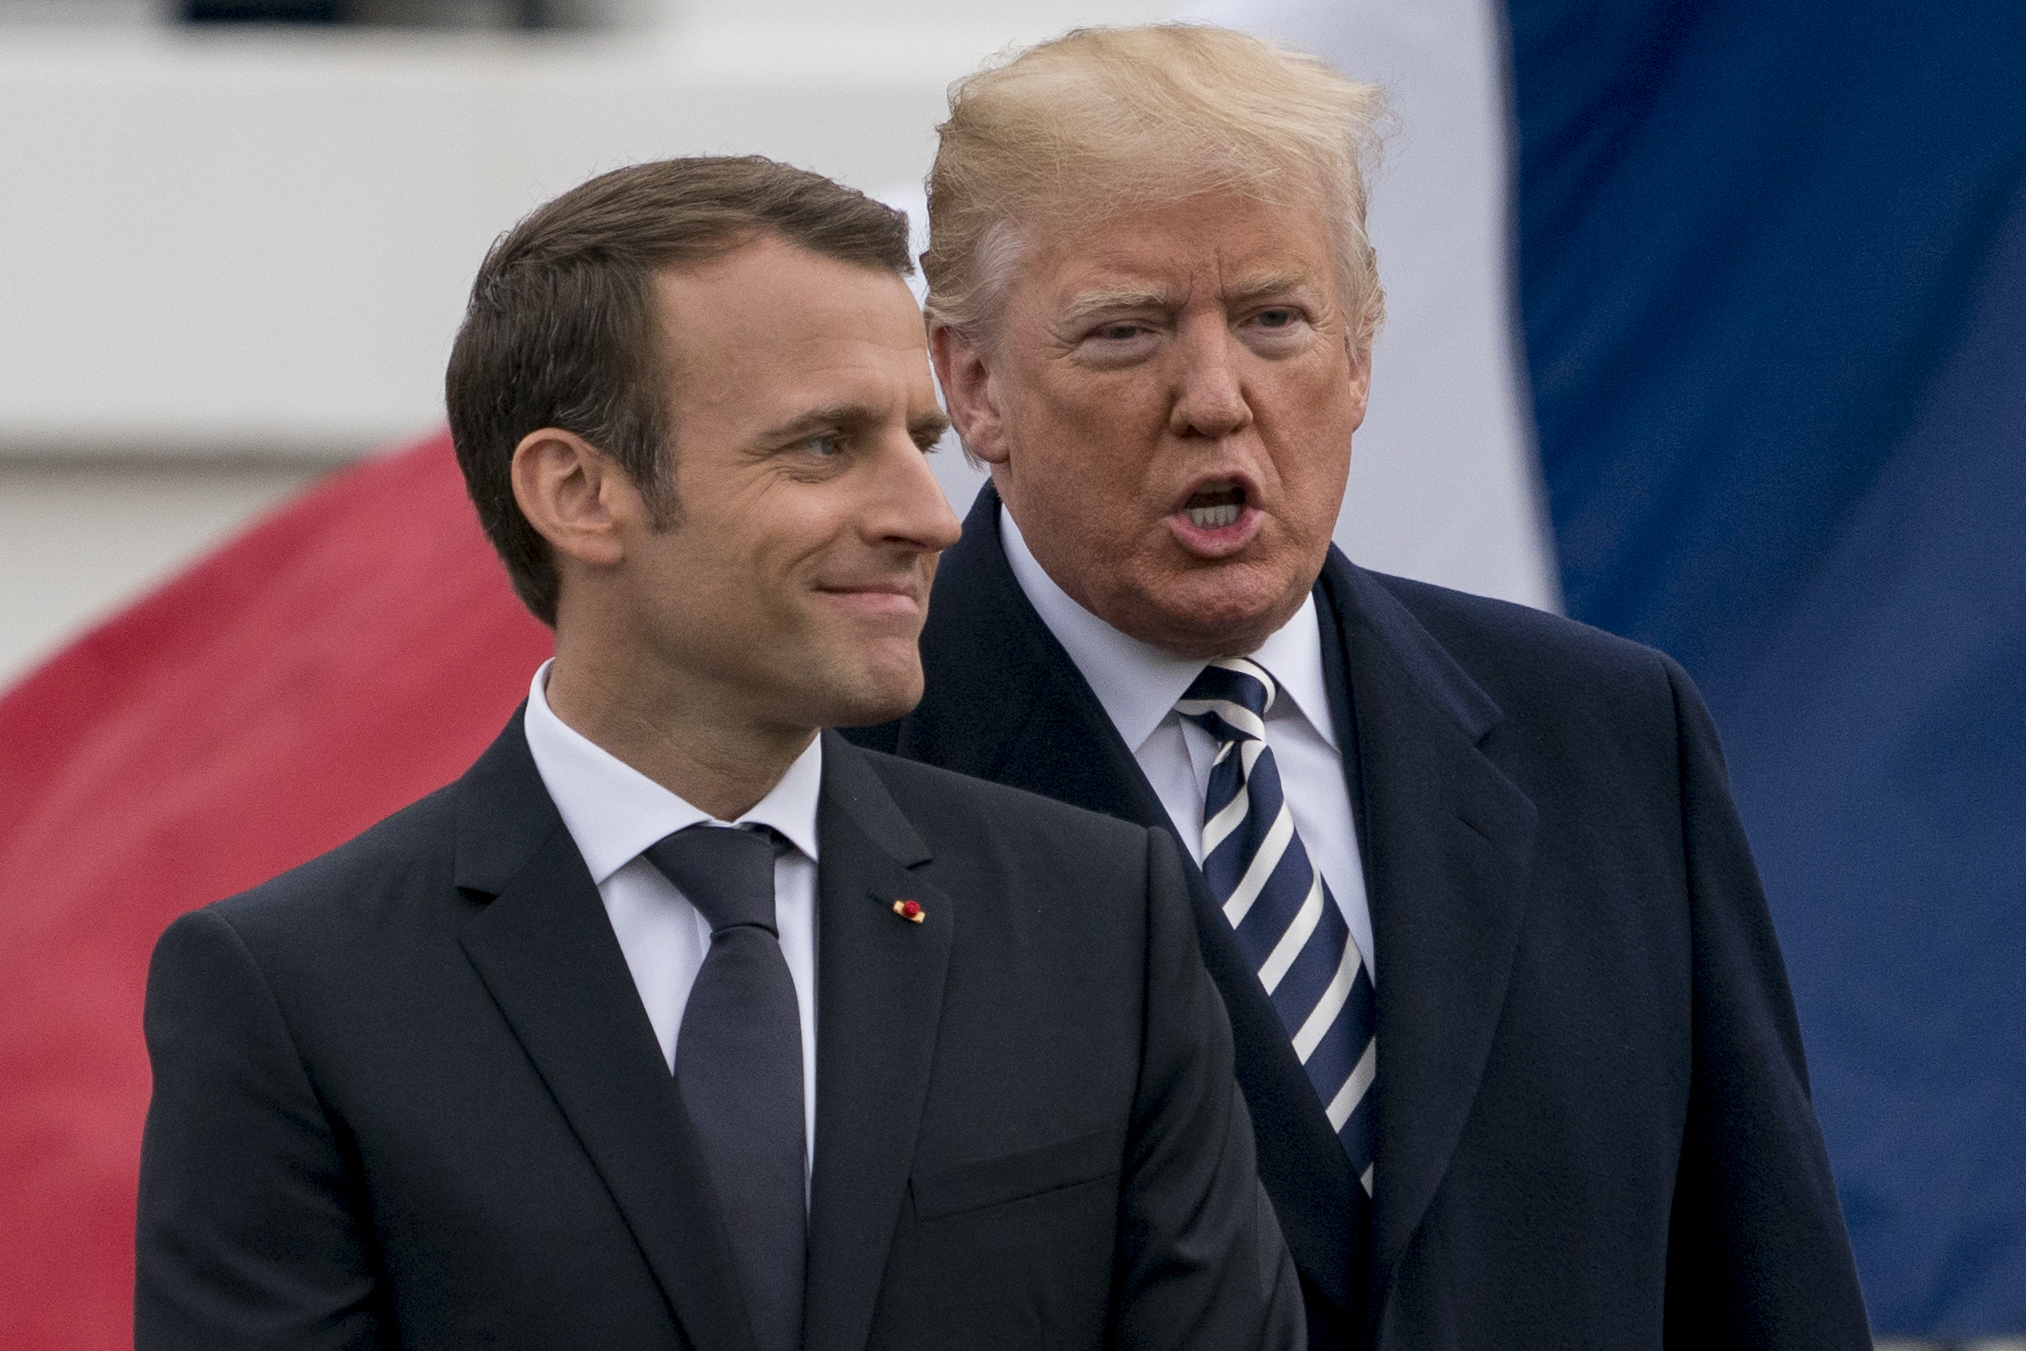 US President Donald Trump and French President Emmanuel Macron on the South Lawn of the White House (Andrew Harnik/AP)